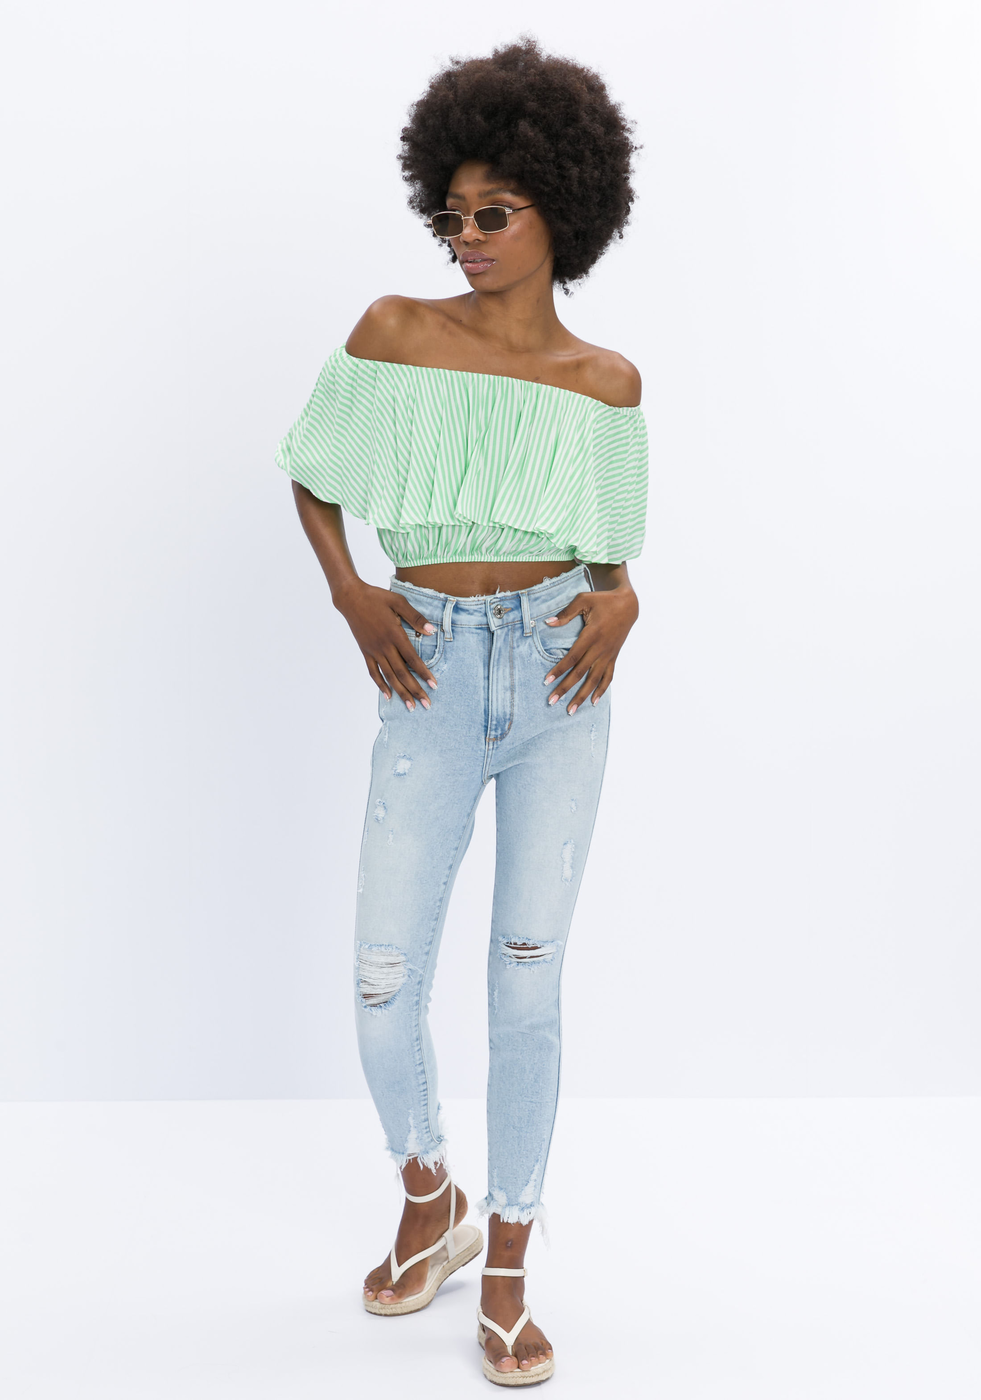 BLUSA CROPPED VERDE MY FAVORITE THINGS OMBRO A OMBRO | ZZ MALL